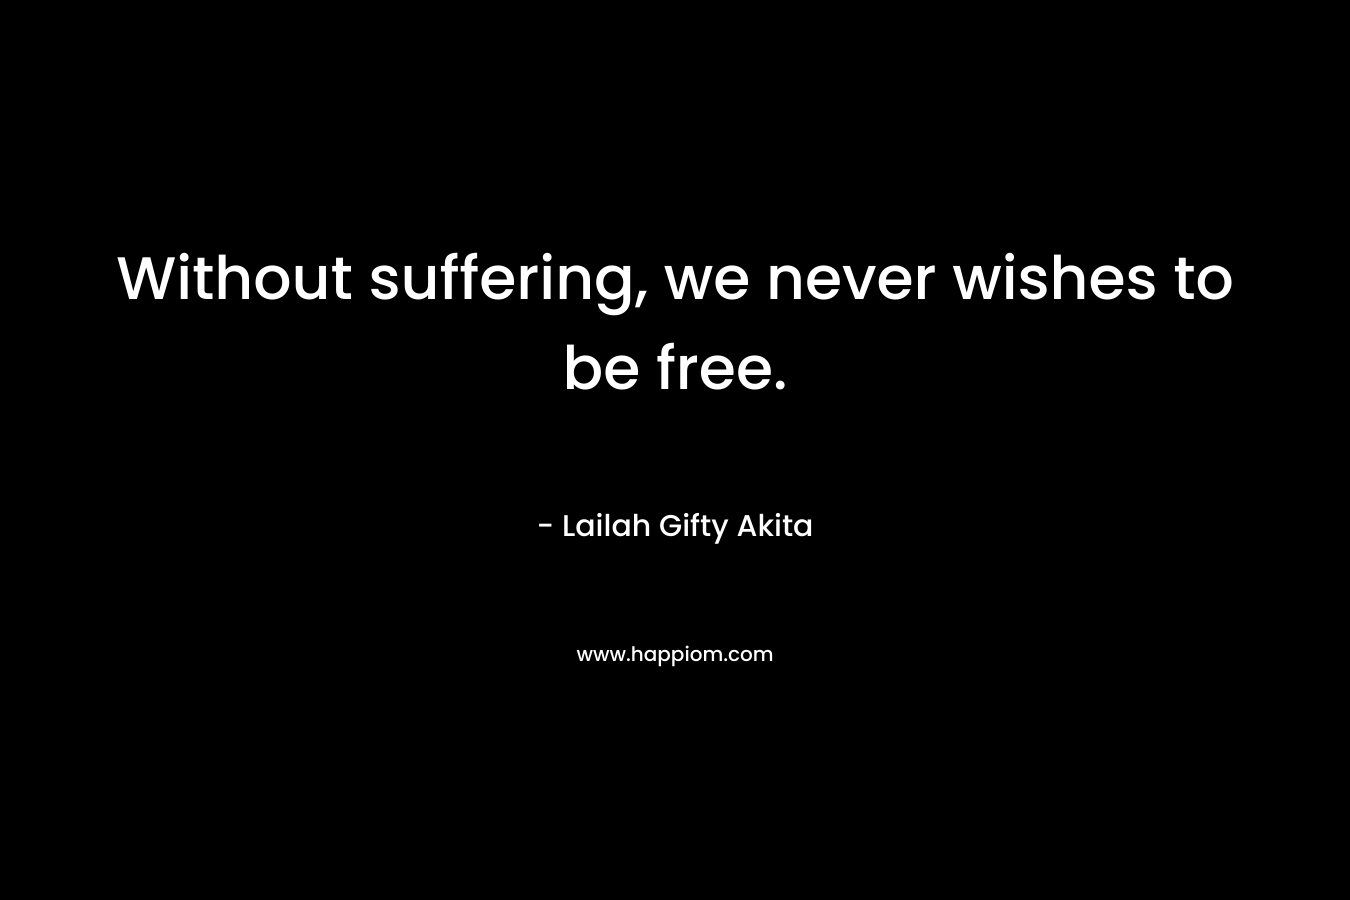 Without suffering, we never wishes to be free.